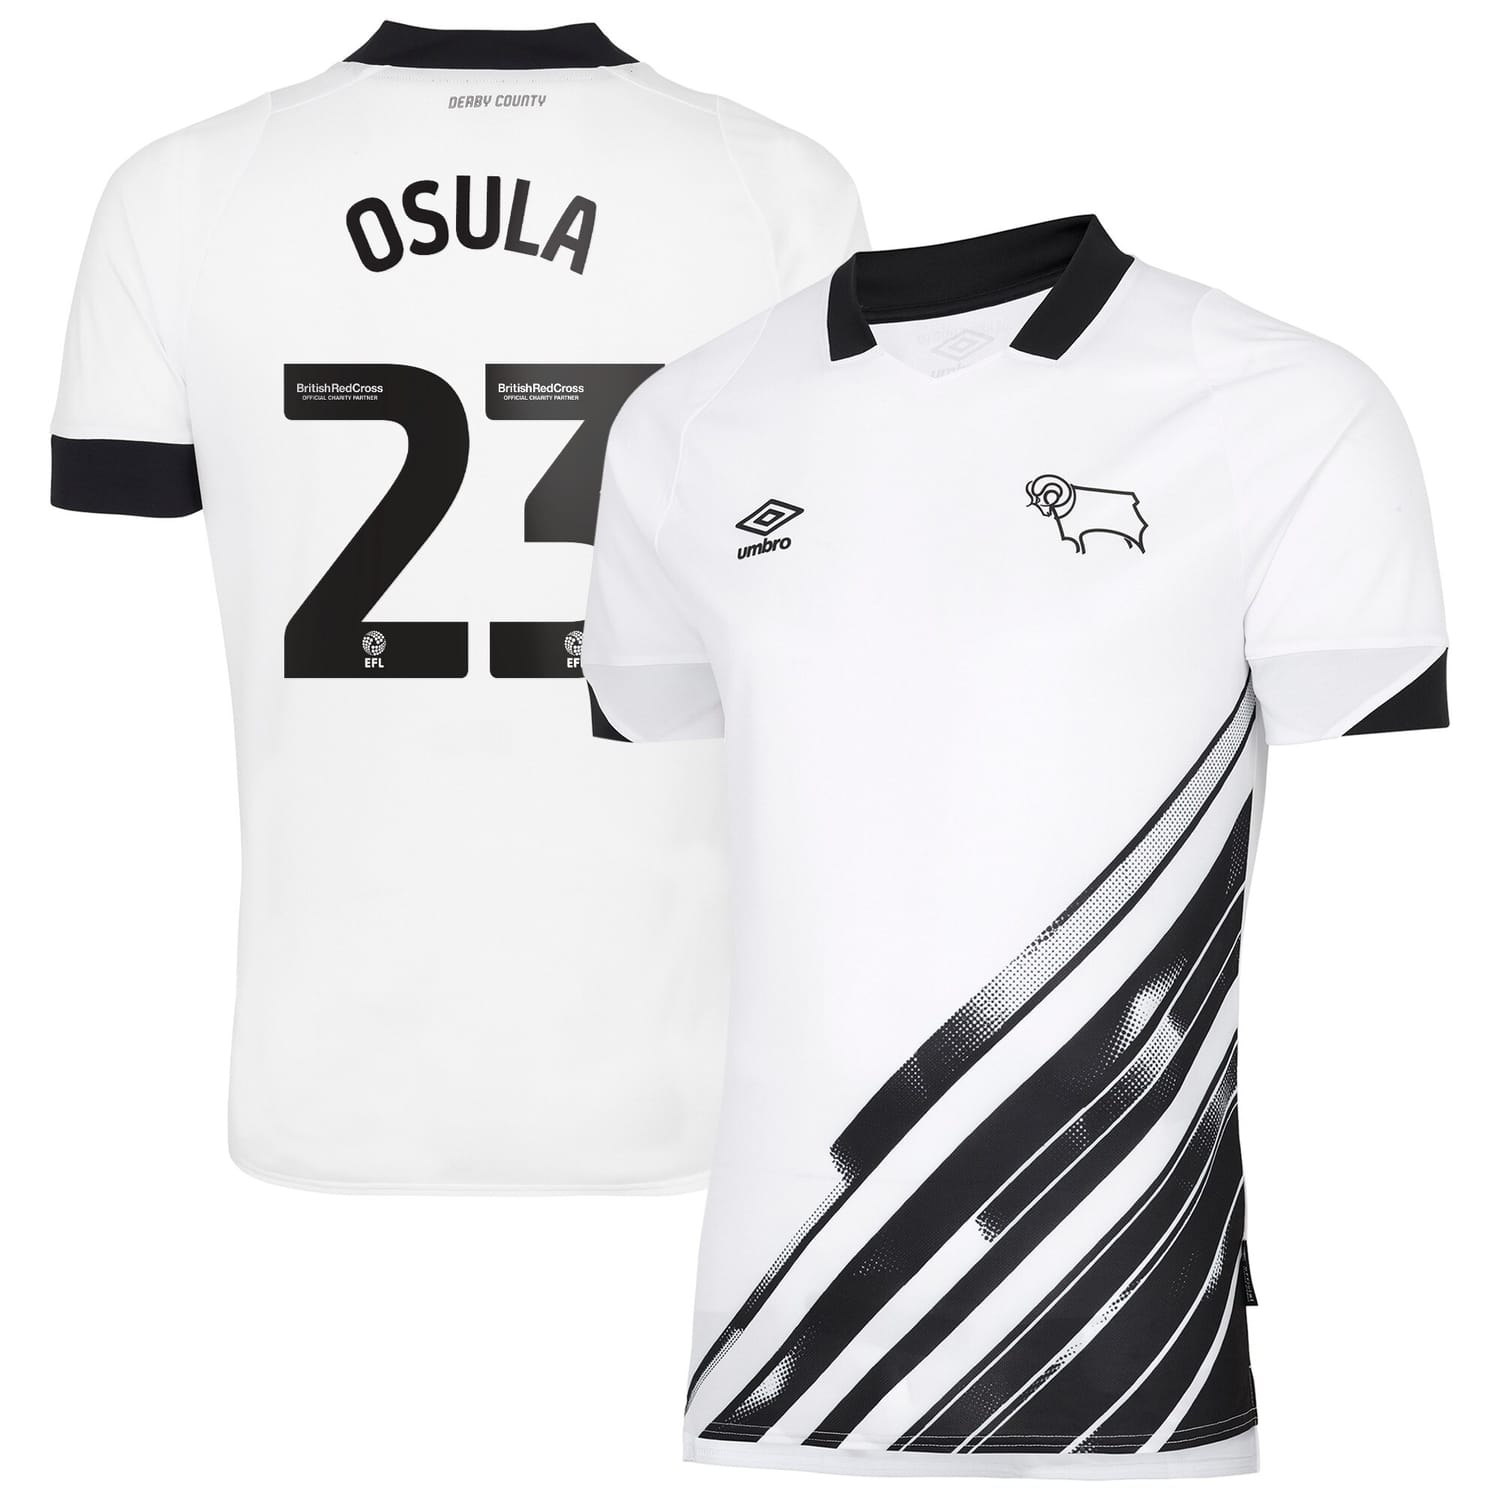 EFL League One Derby County Home Jersey Shirt 2022-23 player Osula 23 printing for Men